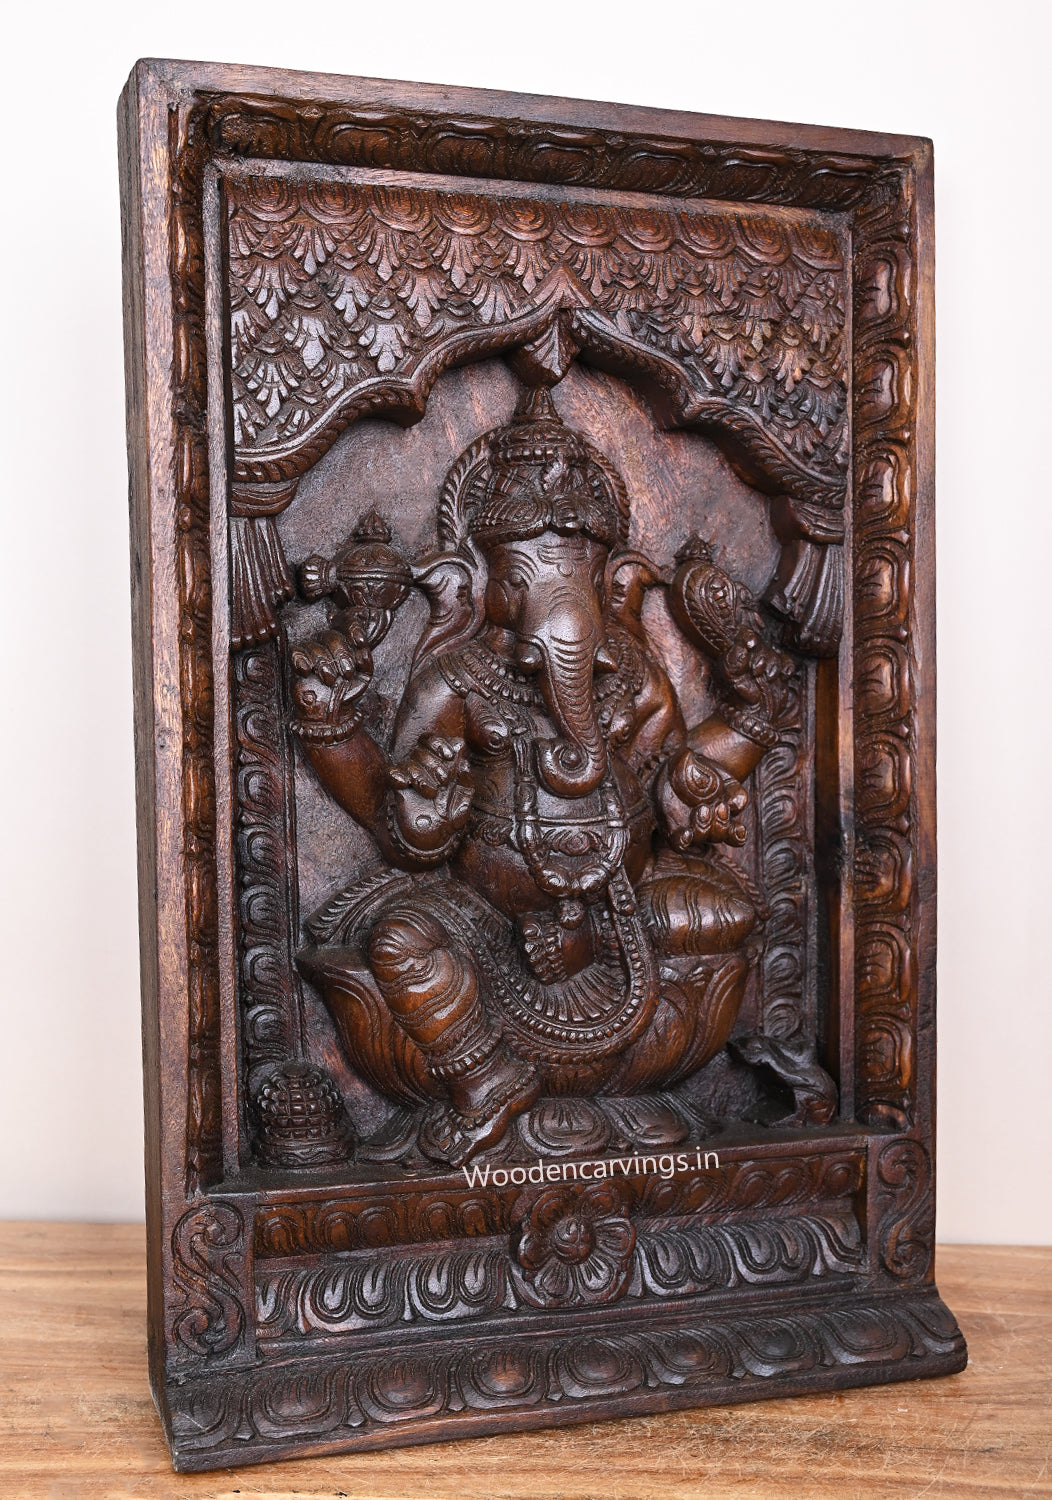 Square Frame Design Decorative Lord Ganapathi Seated on Lotus Wax Brown Finishing Handmade Sculpture 23.5"